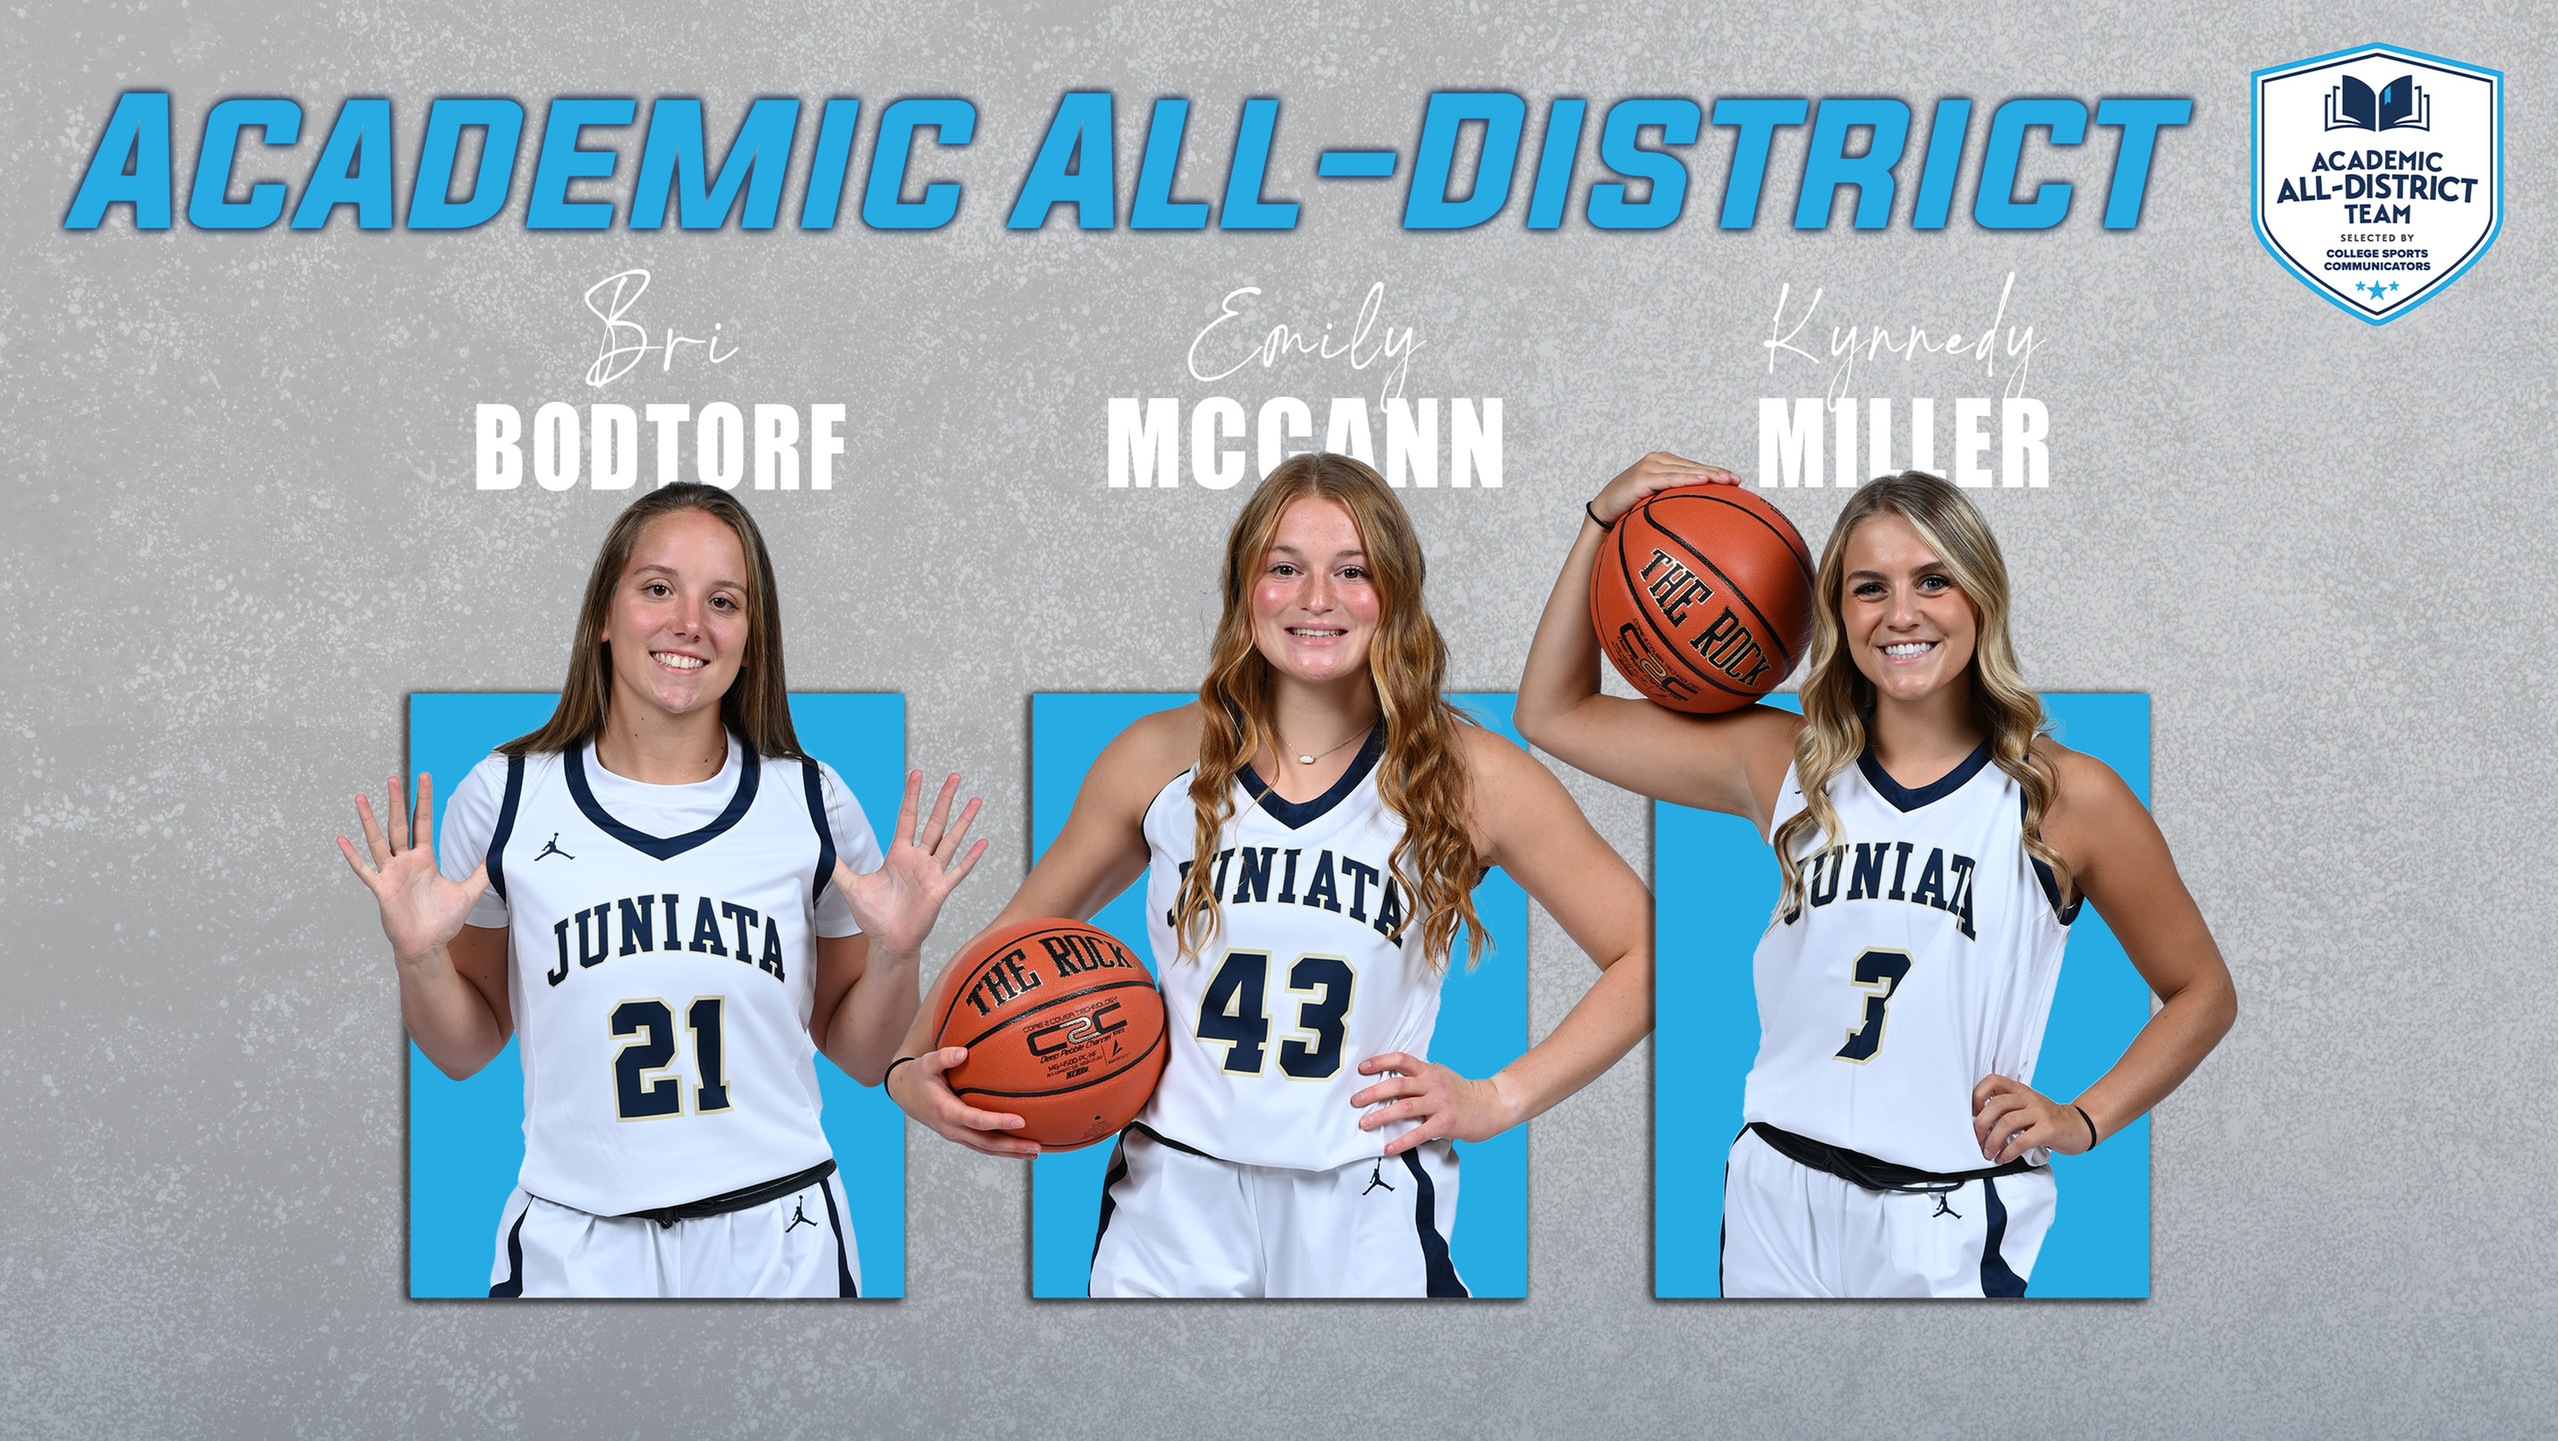 Bodtorf, McCann, and Miller Named to CSC Academic All-District&reg; Women's Basketball Team